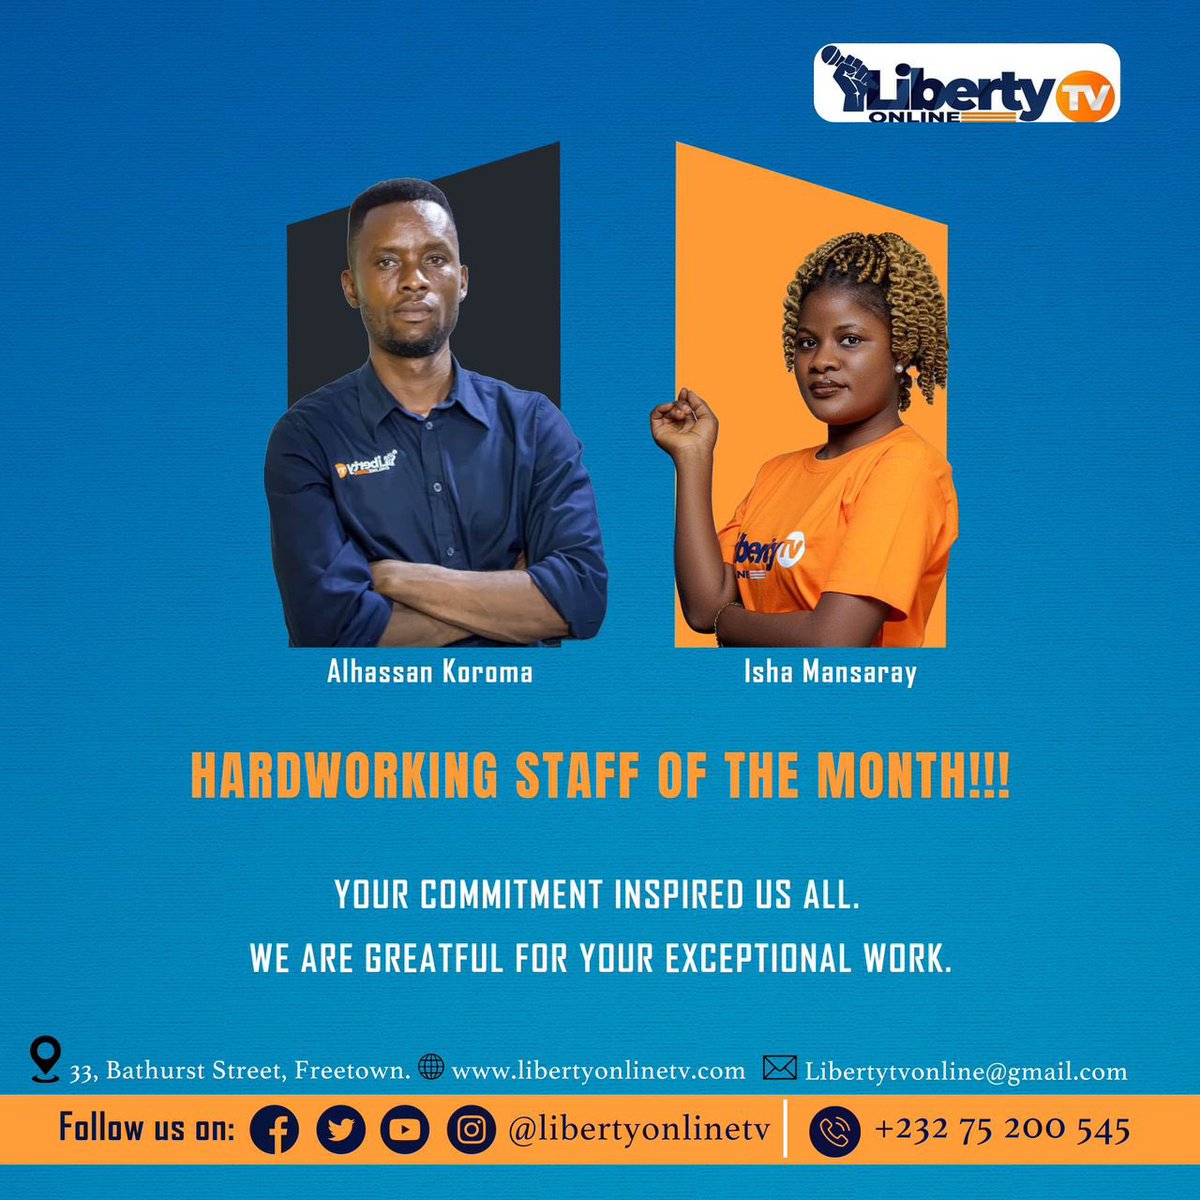 We take great pride in acknowledging the employees who have consistently shown dedication, passion, and hard work as this month's Staff of the Month. 

Your invaluable contributions to the team are deeply appreciated!

#libertyonlinetv
#FREE
#fearless
#inclusive
#journalism